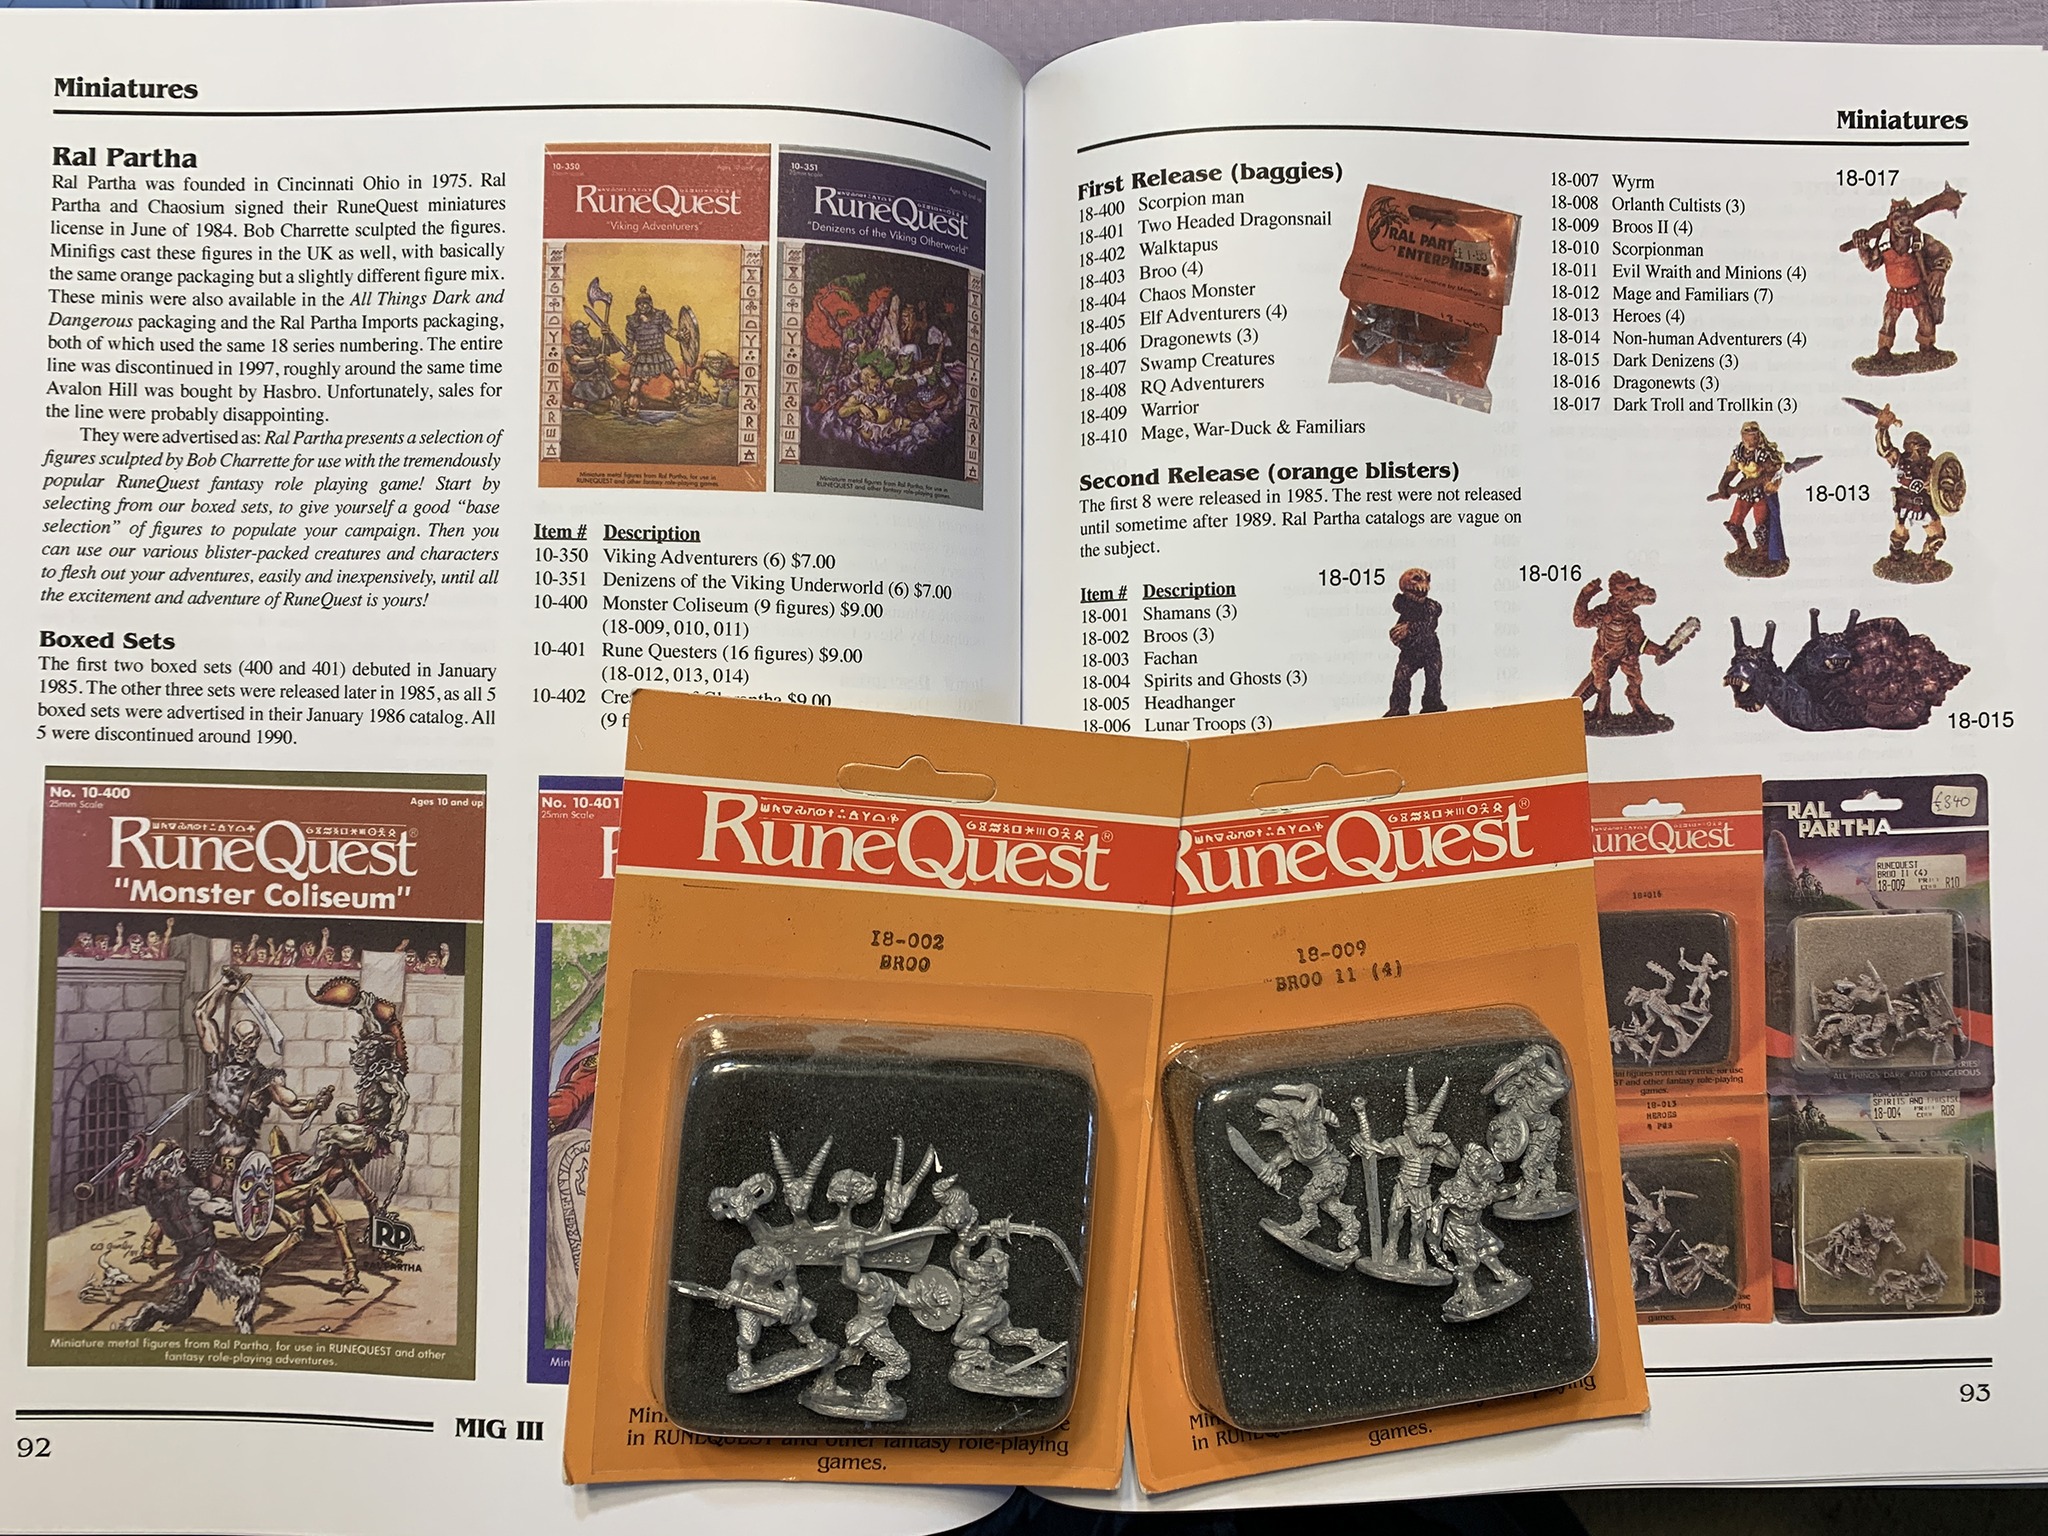 Pages 92-93 of the MIG3: Meints Index to Glorantha feature almost all the info I know about the Ral Partha RuneQuest miniatures line produced from 1985 to 1997. The two blister packs of minis that contained the 7 different broo they produced (18-002 and 18-009) are added for your closer inspection.